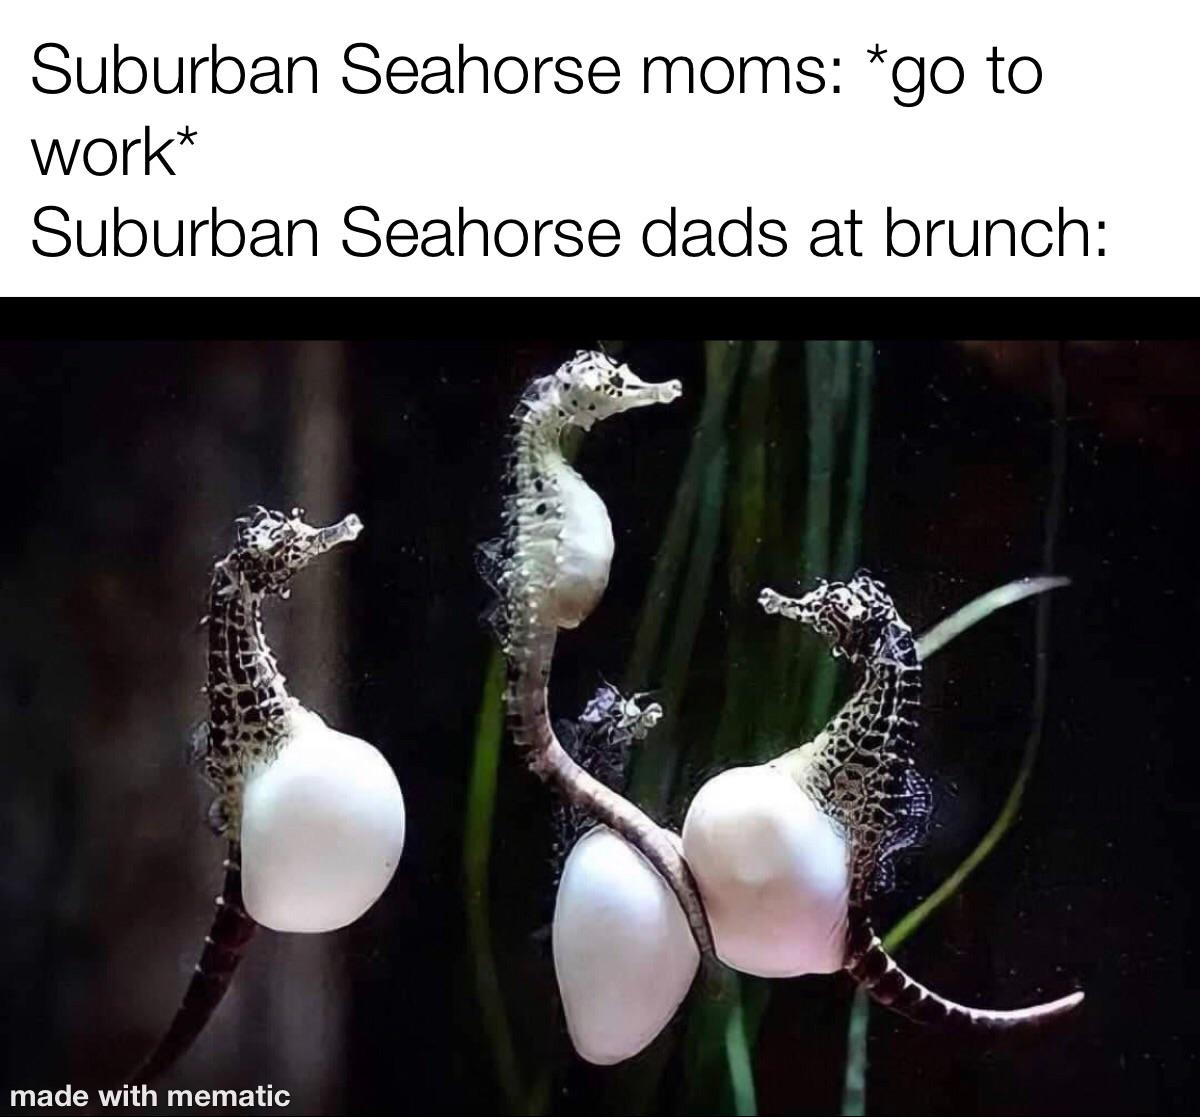 pregnant seahorse - Suburban Seahorse moms go to work Suburban Seahorse dads at brunch made with mematic